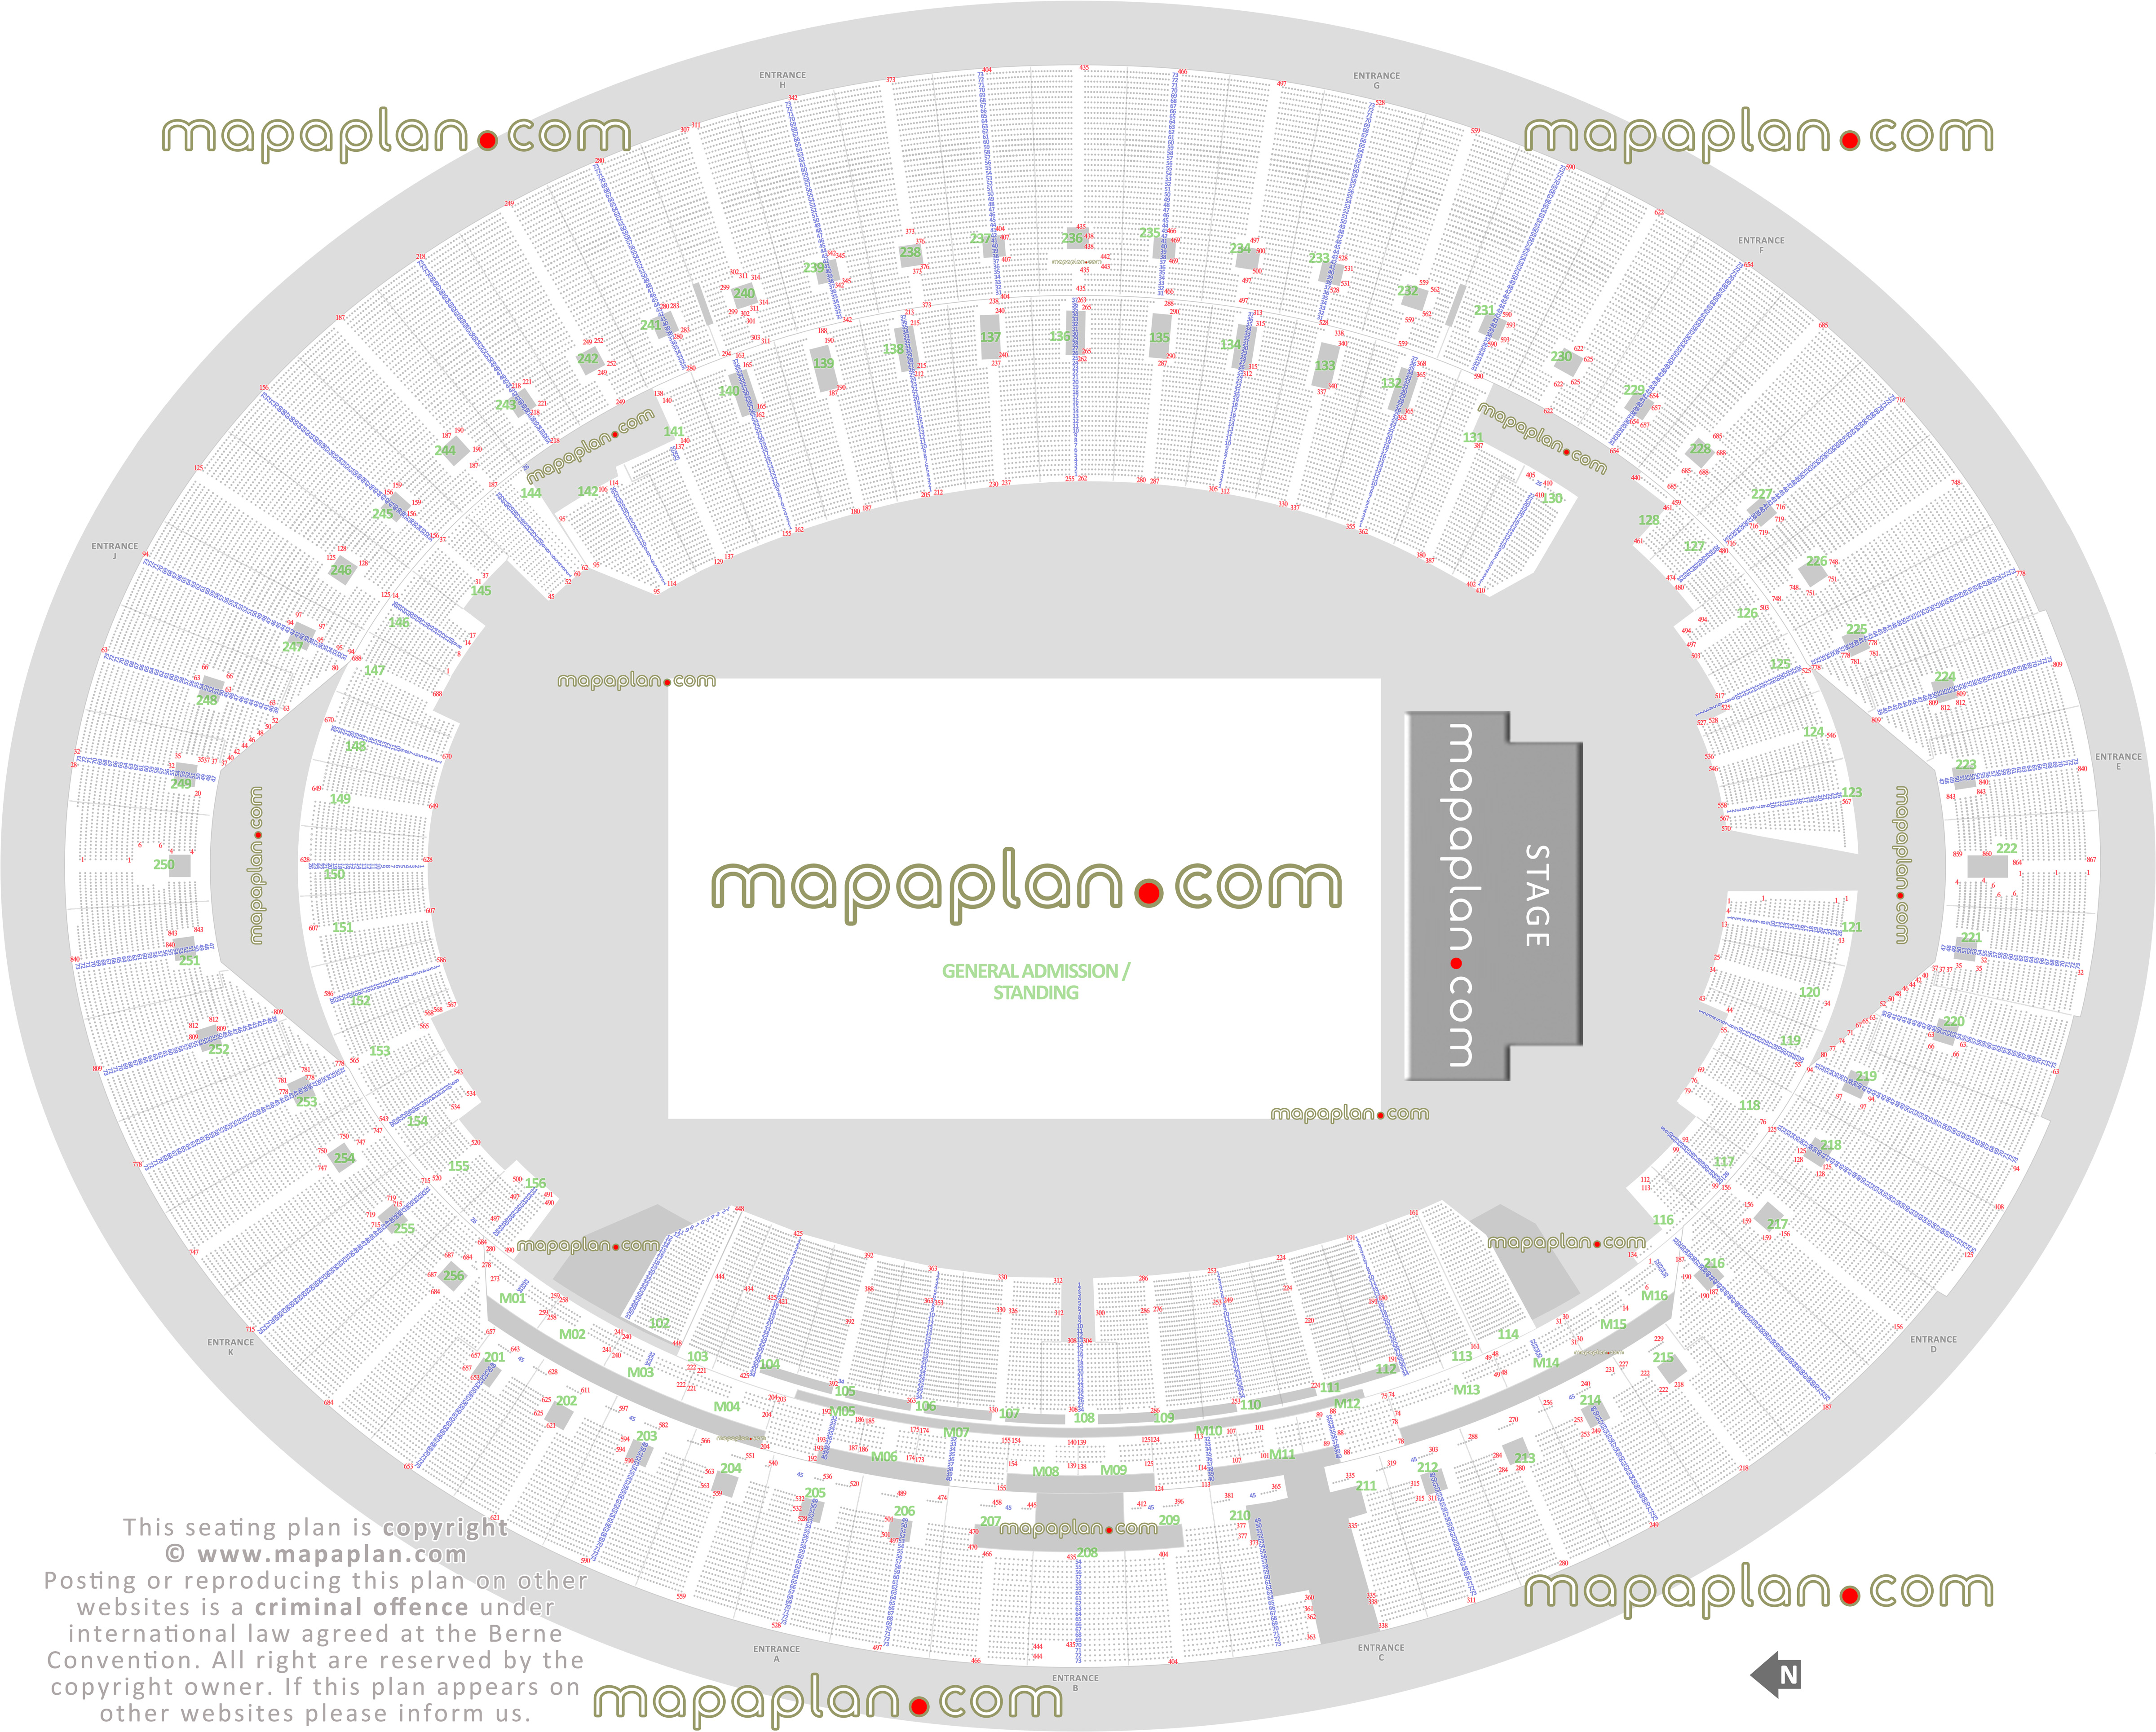 London Stadium (West Ham United Olympic Park) seating plan map seating plan concerts exact block numbers rows best seats selection layout lower middle upper tier club level general admission pitch standing